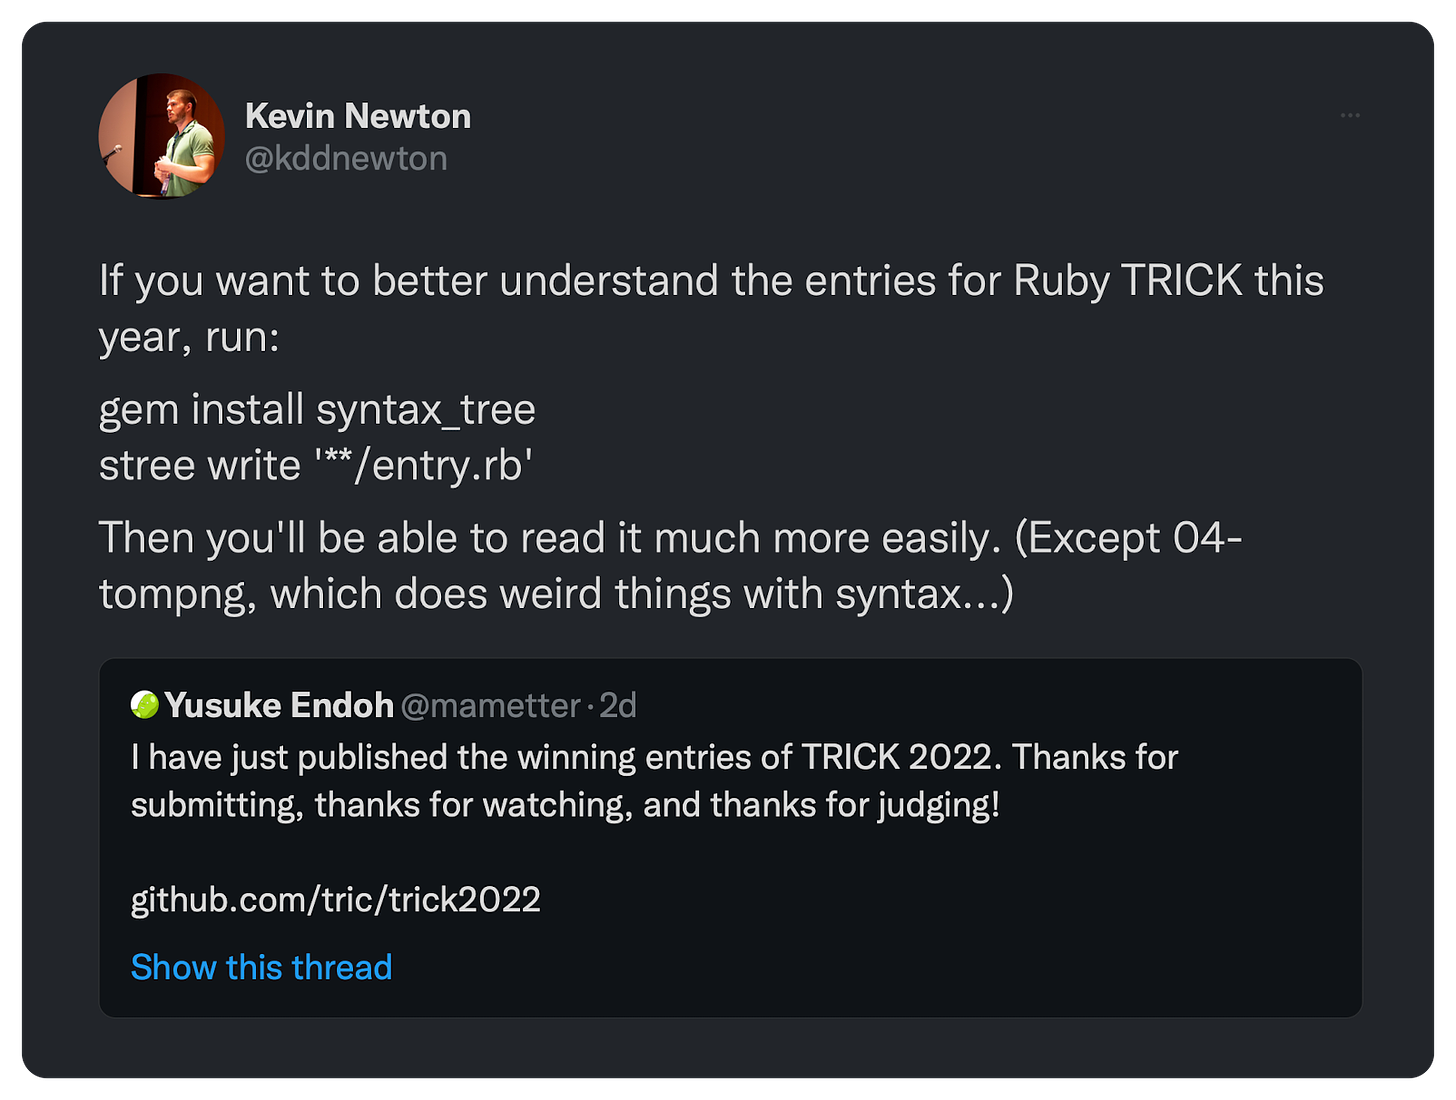 If you want to better understand the entries for Ruby TRICK this year, run: gem install syntax_tree stree write '**/entry.rb' Then you'll be able to read it much more easily. (Except 04-tompng, which does weird things with syntax...)